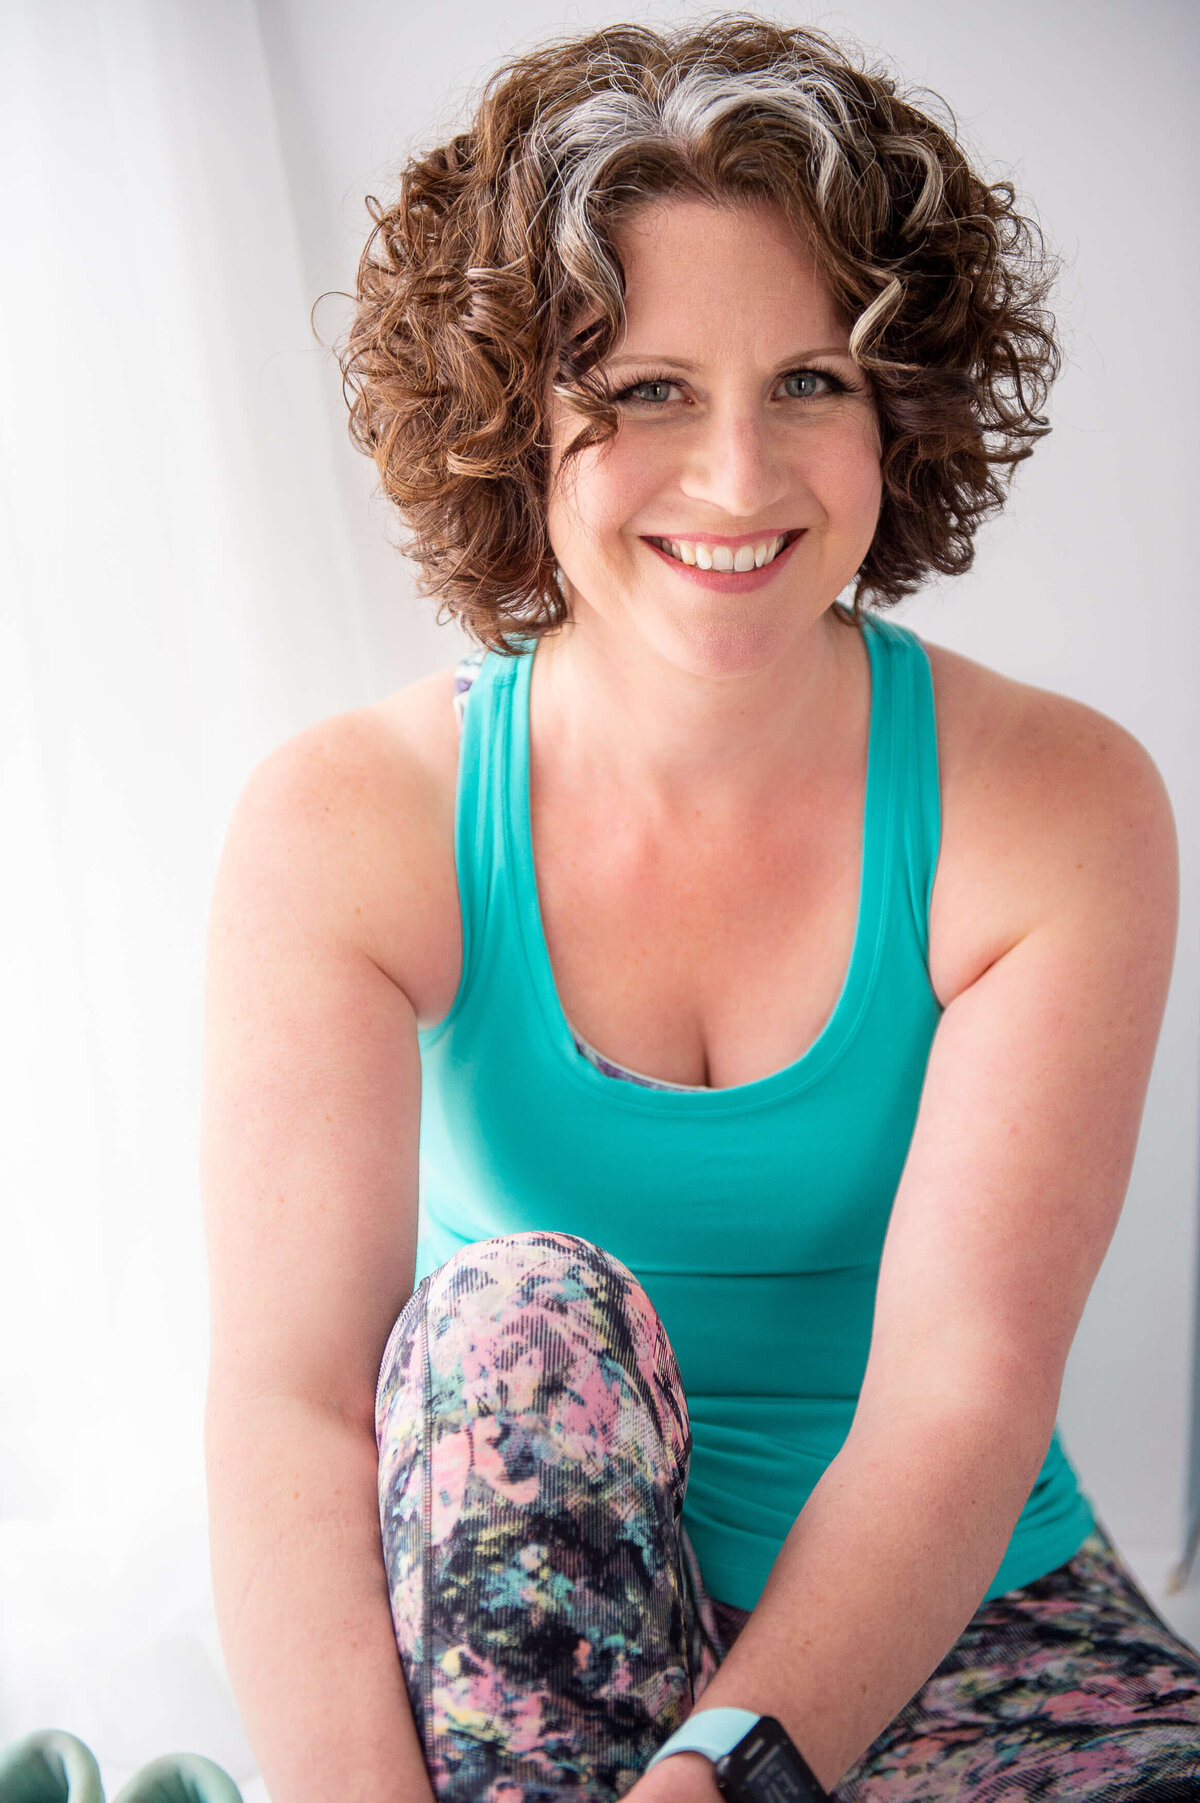 Ottawa branding photography of a smiling woman in a turquoise tank top and patterned leggings.  Captured by JEMMAN Photography COMMERCIAL